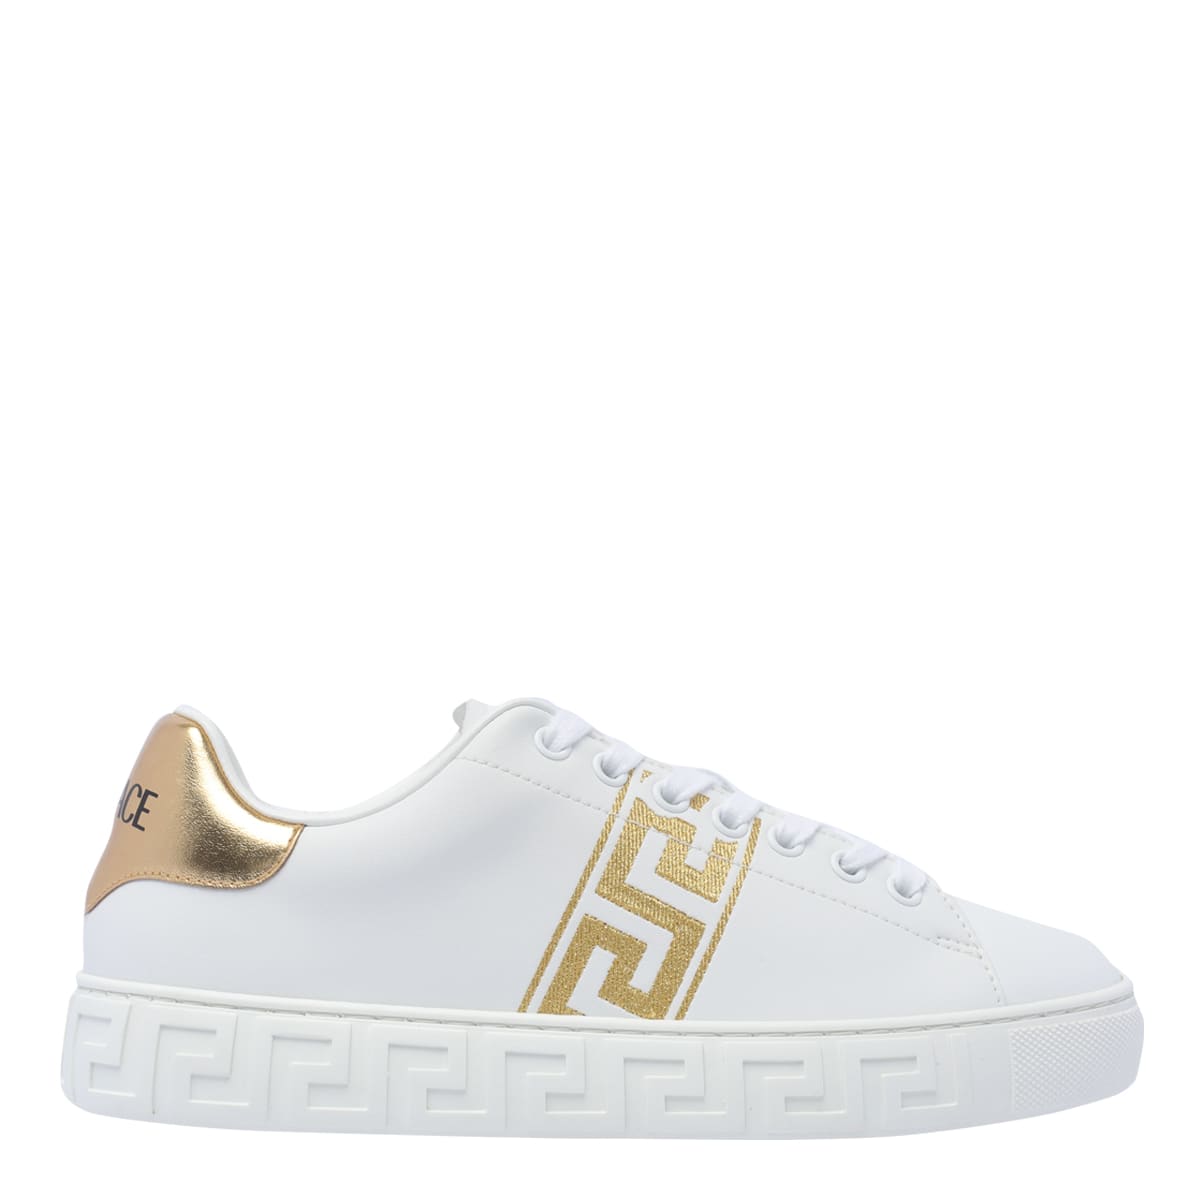 Greca Embroidered Sneakers